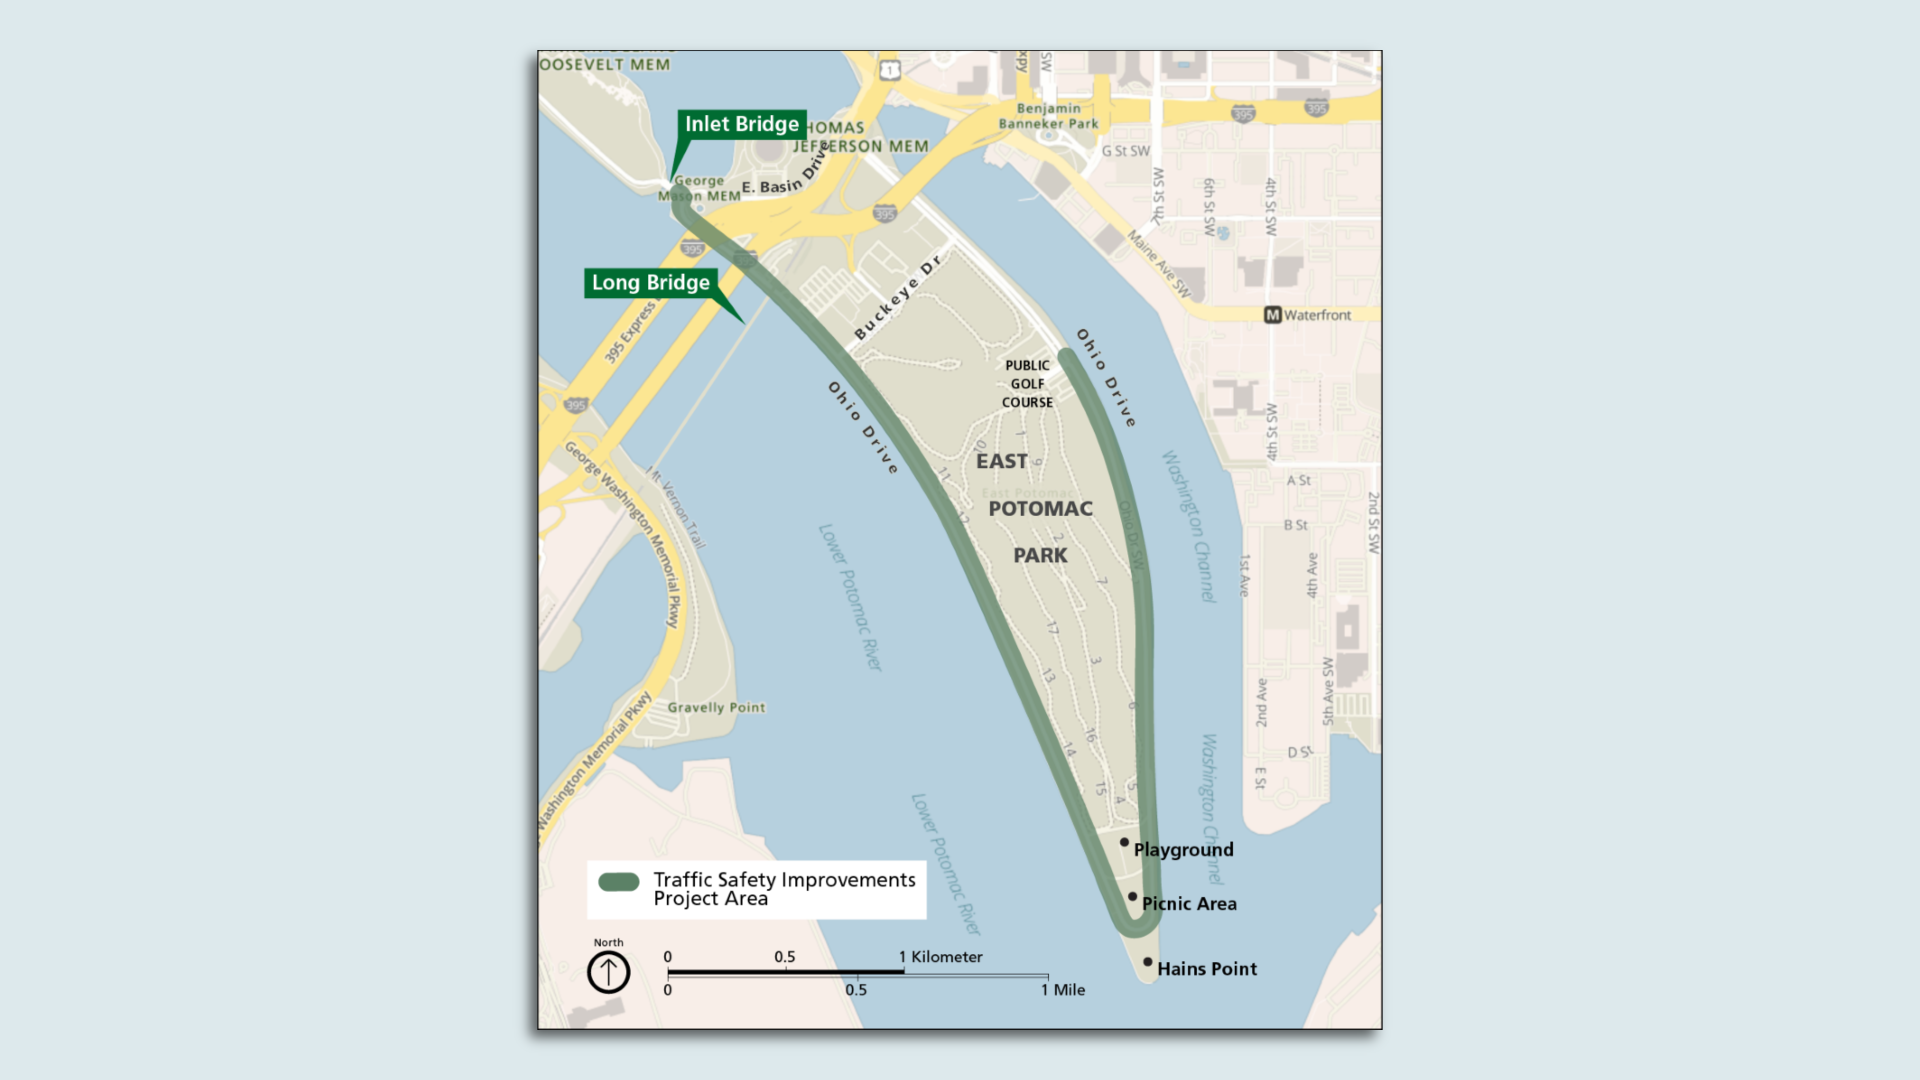 A map of East Potomac Park highlighting the 2.5-mile roadway on its perimeter that will be redesigned to add a new bicycle and pedestrian lane.